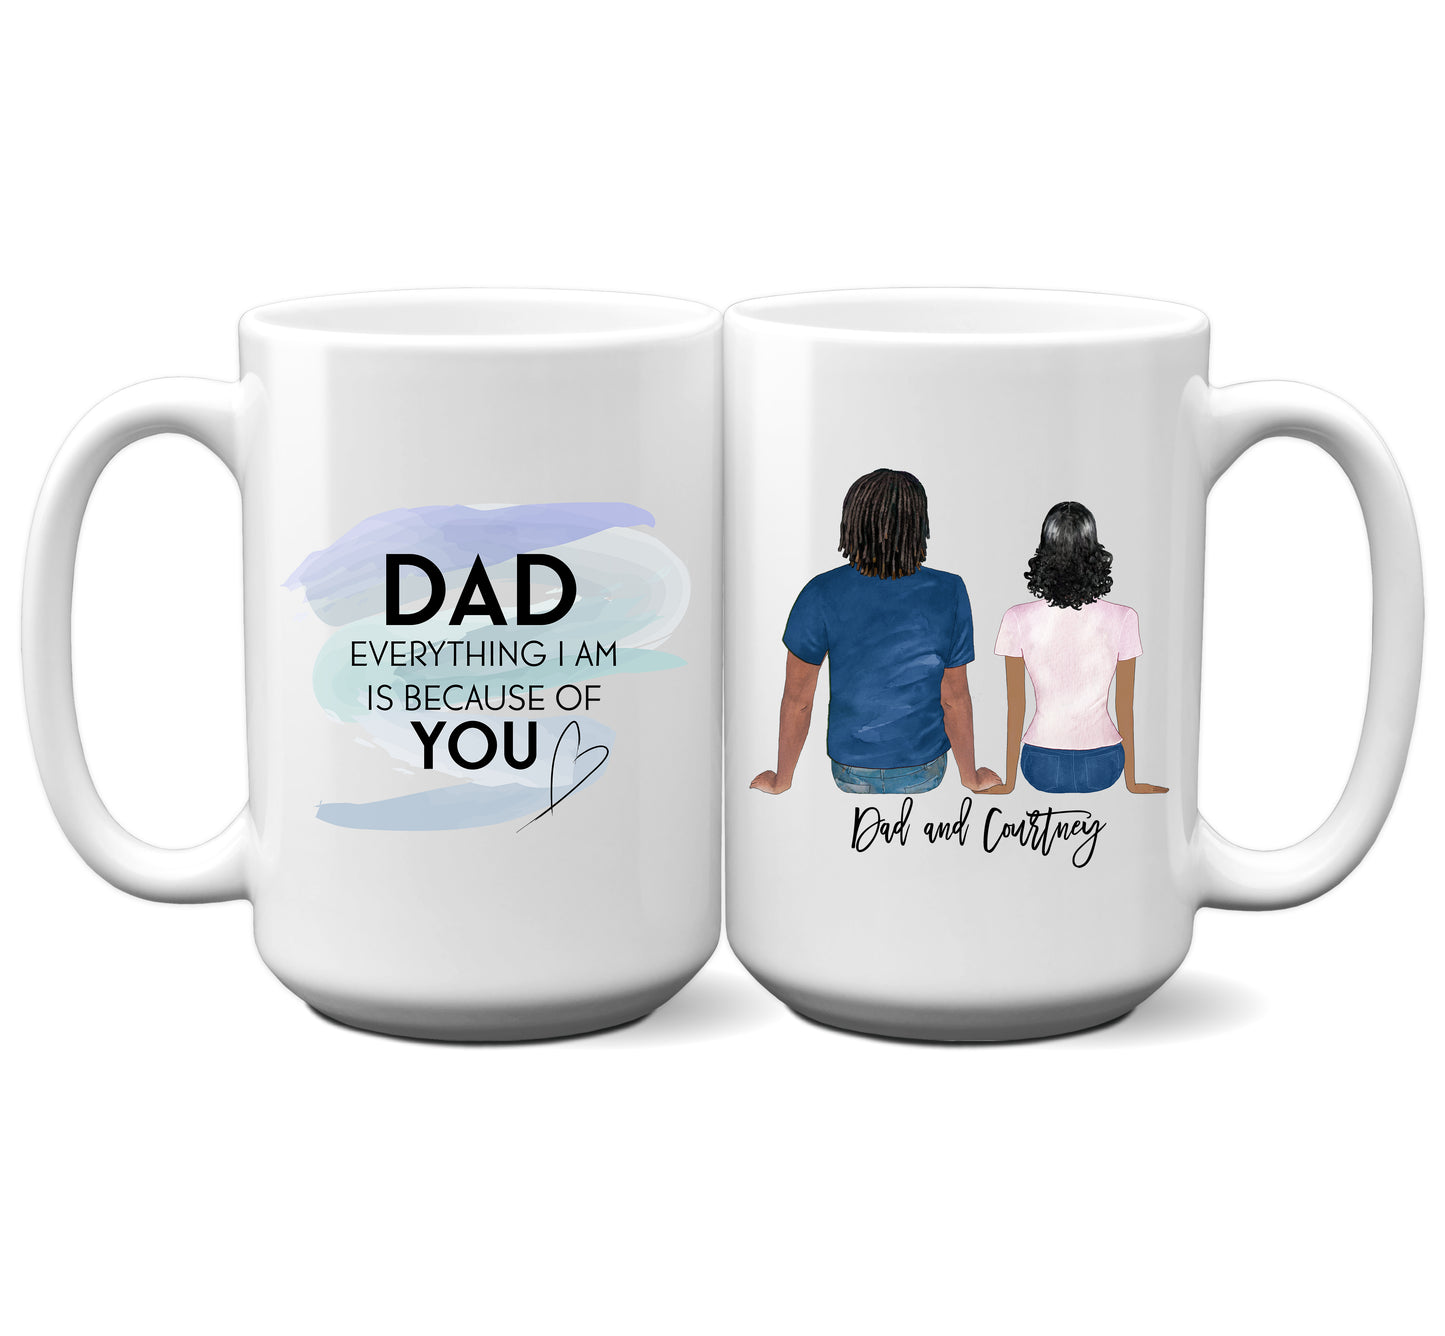 S409 Dad Everything I Am Is Because of You - Personalized Mug